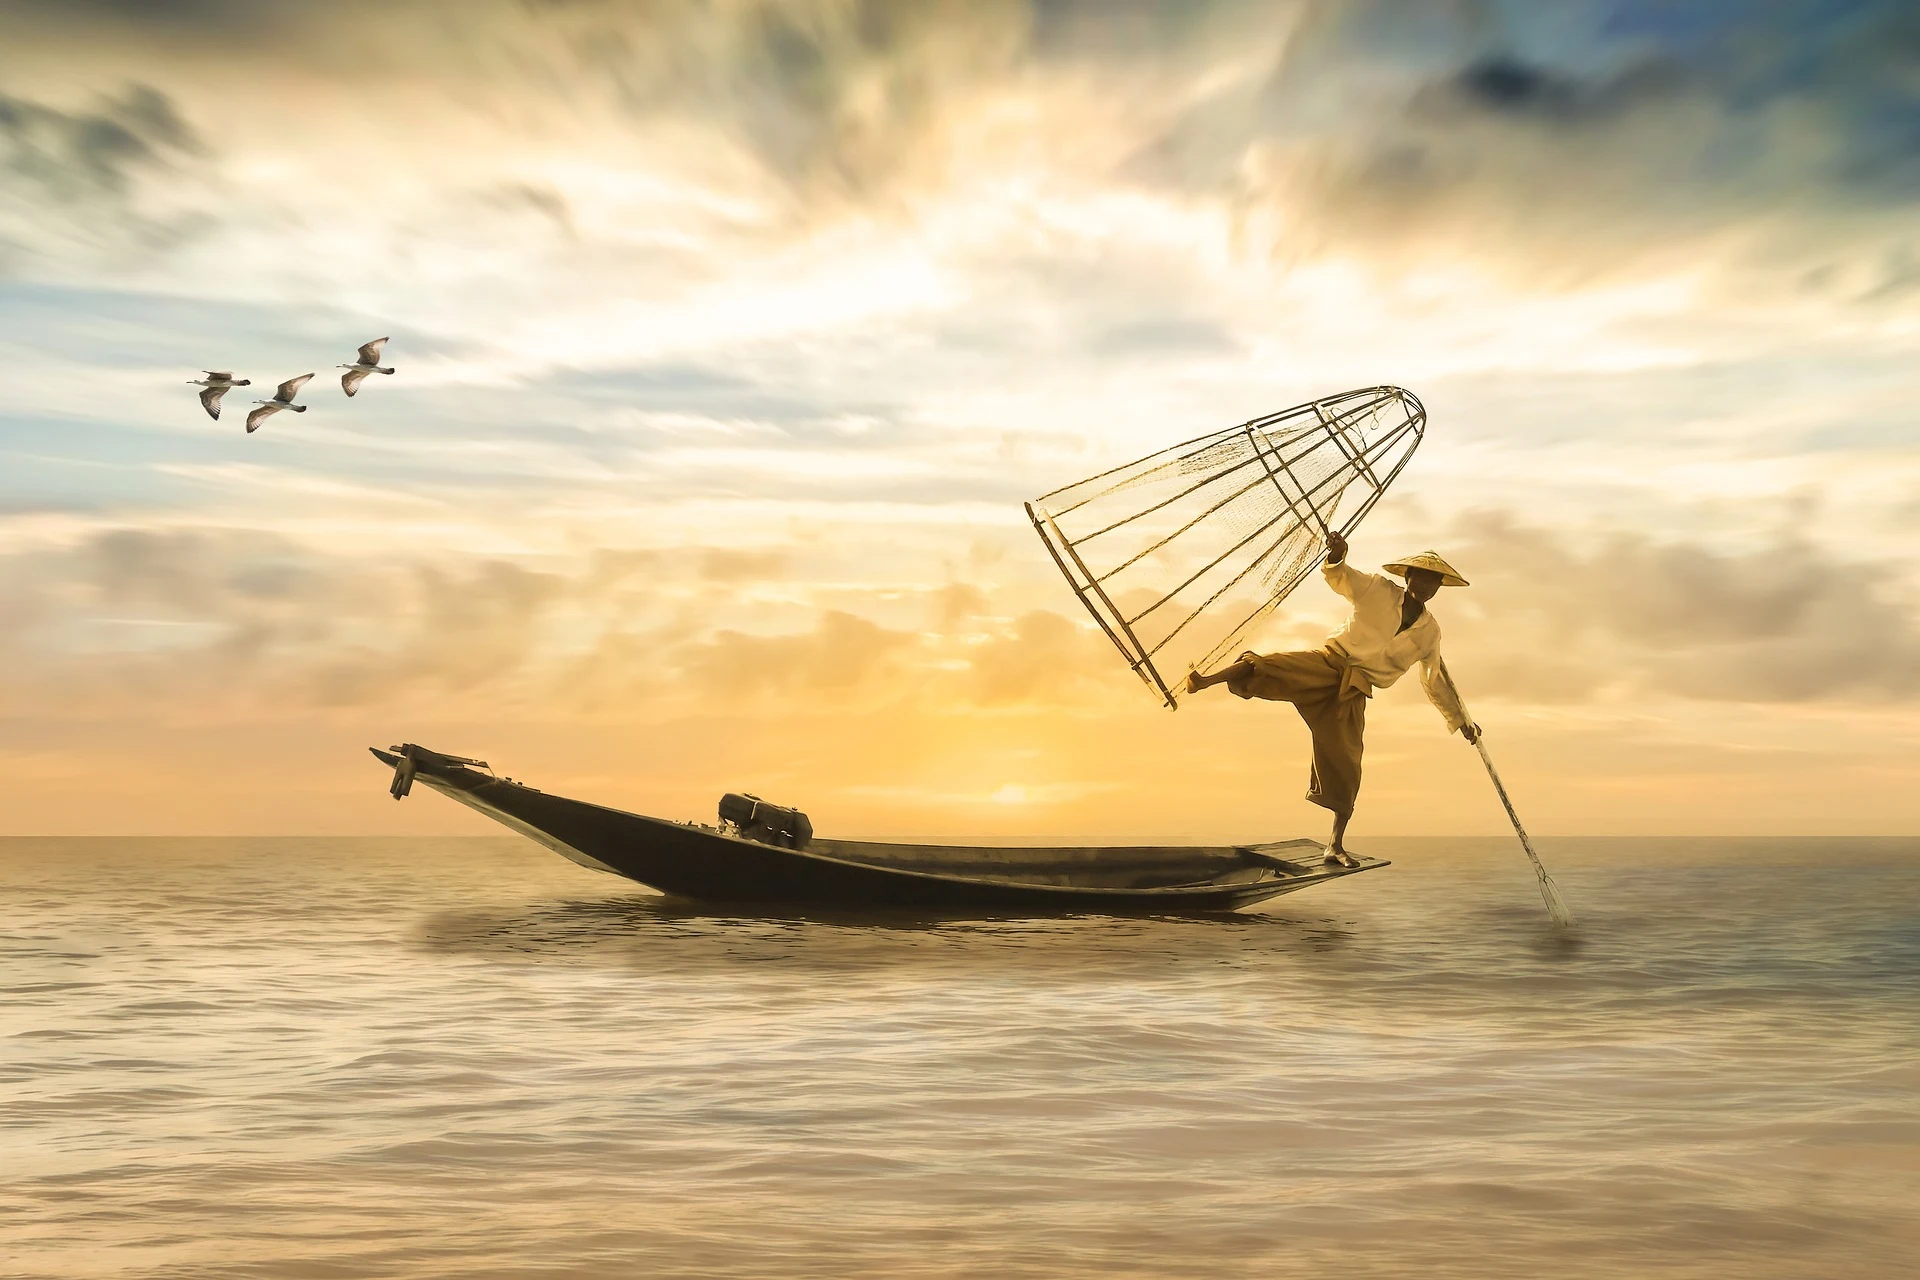 A man gracefully balancing on a small boat, attempting to fish with one hand while holding a basket, exemplifying the balance of life's elements.